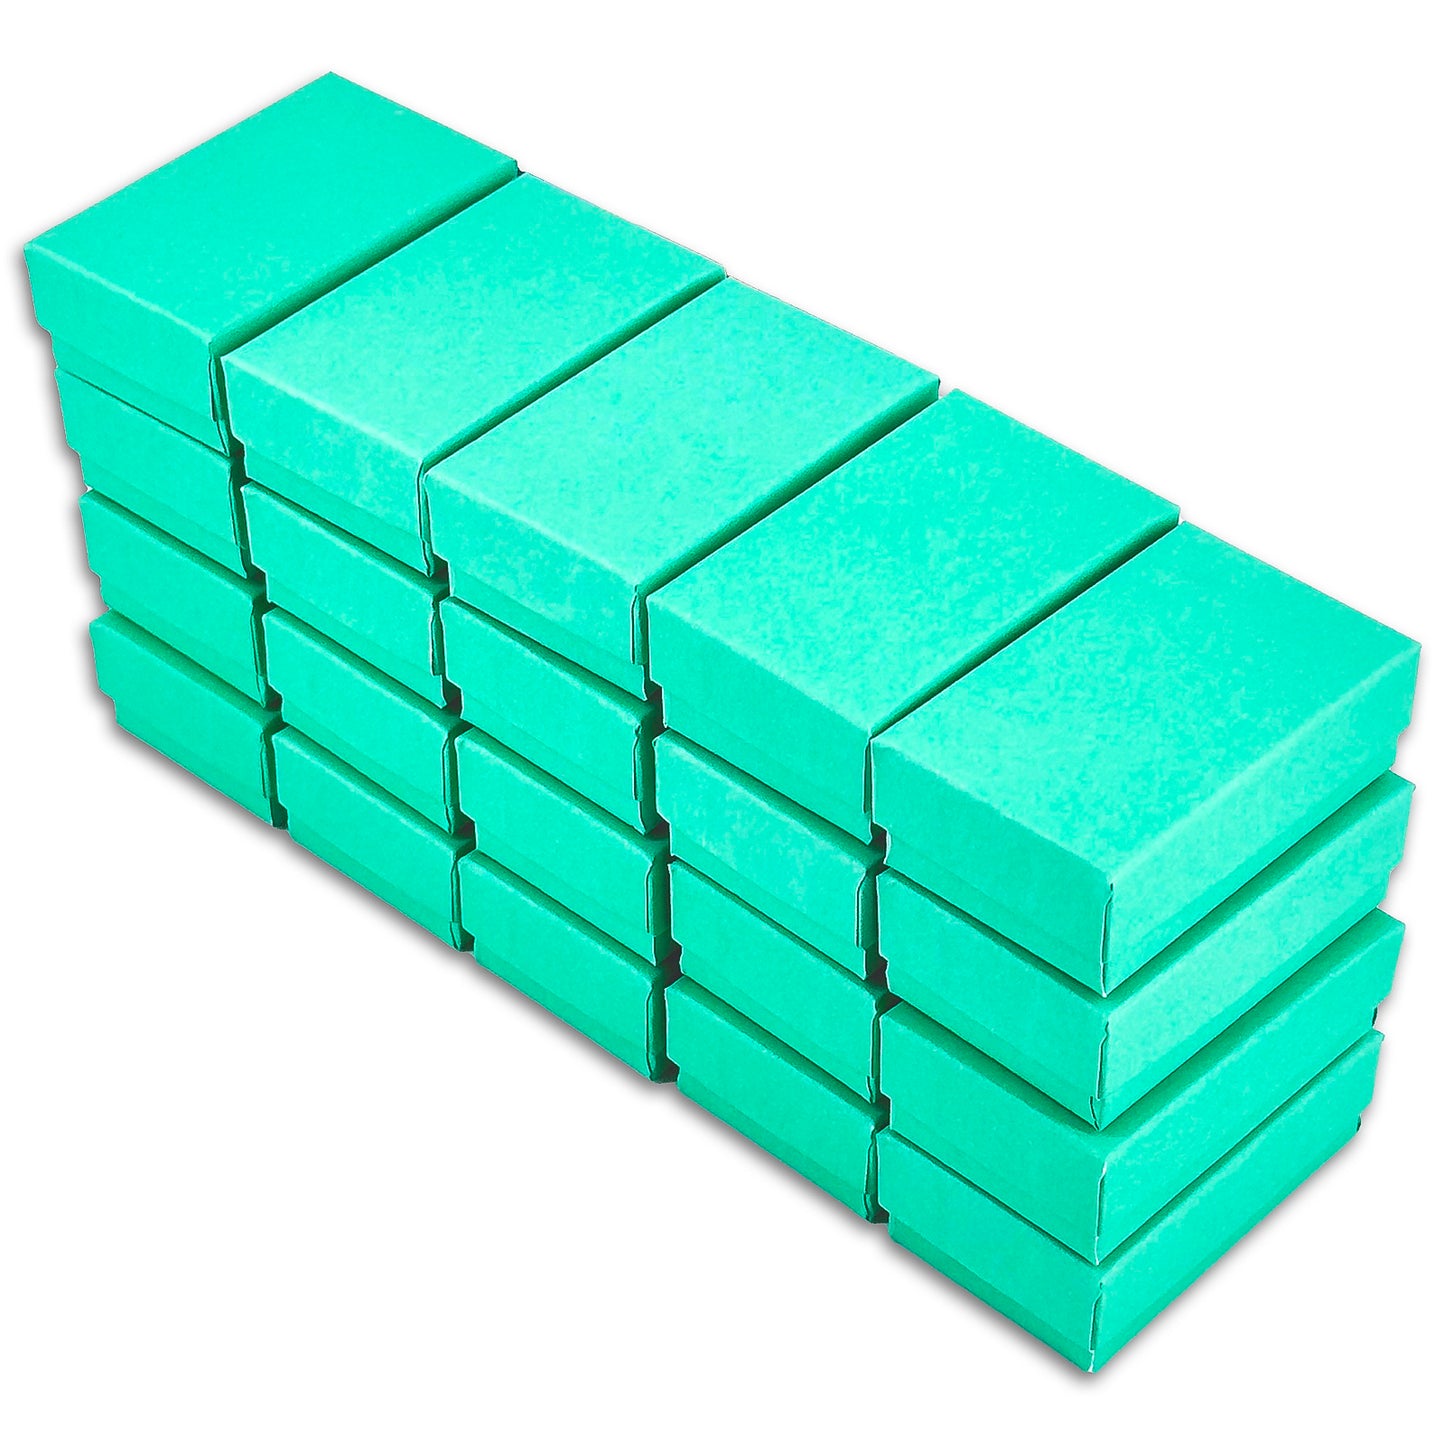 2 1/8" x 1 5/8" x 3/4" Teal Green Cotton Filled Paper Box